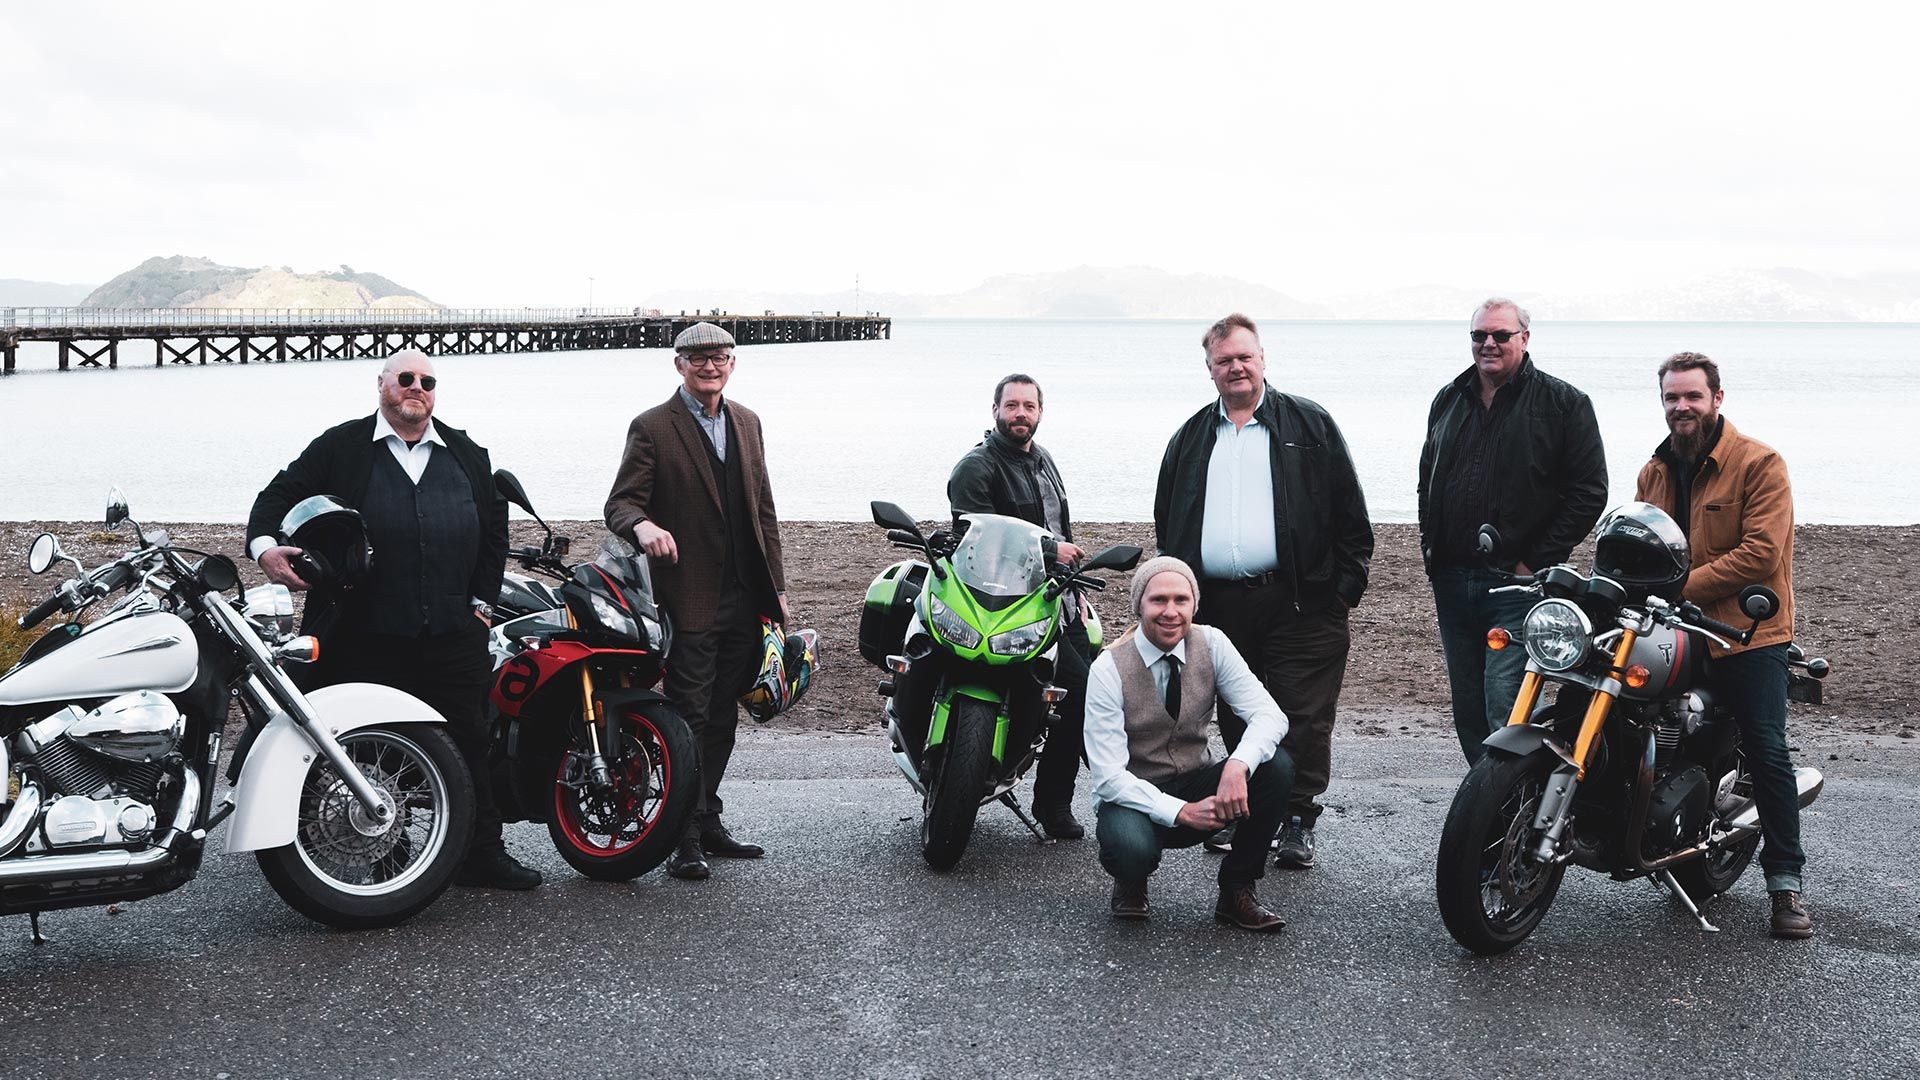 Group photo of the members of The Motorcycle Collective